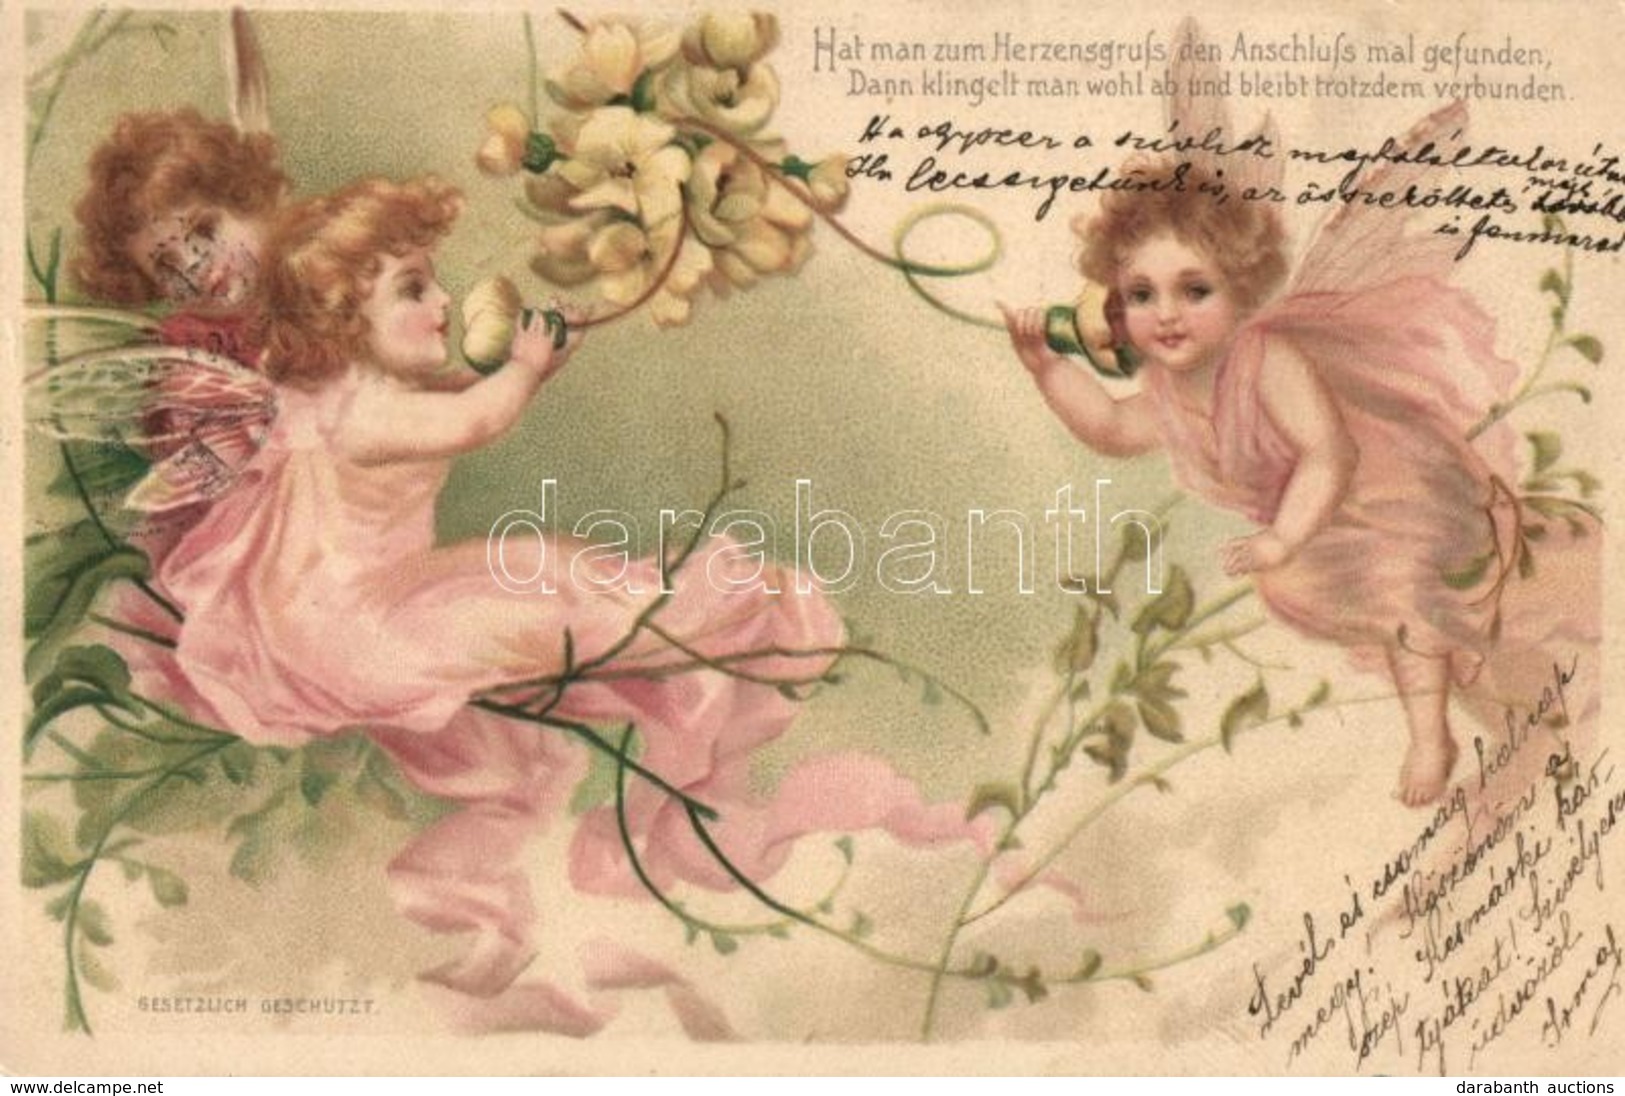 T2 1901 Angels. Art Nouveau Litho Greeting Card - Ohne Zuordnung